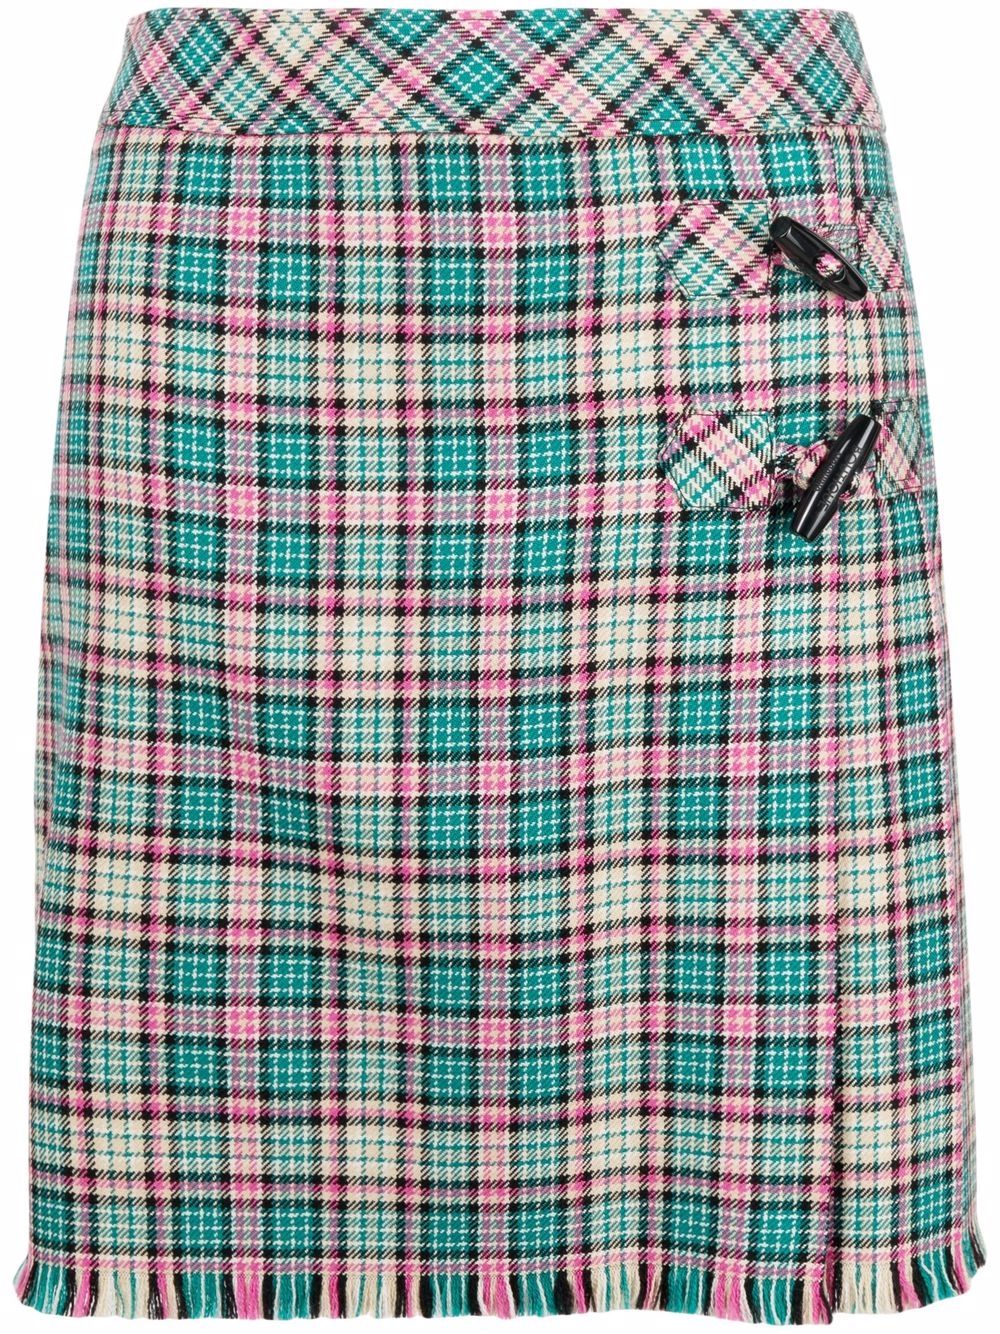 BOUTIQUE MOSCHINO CHECKED WOOL WRAP SKIRT